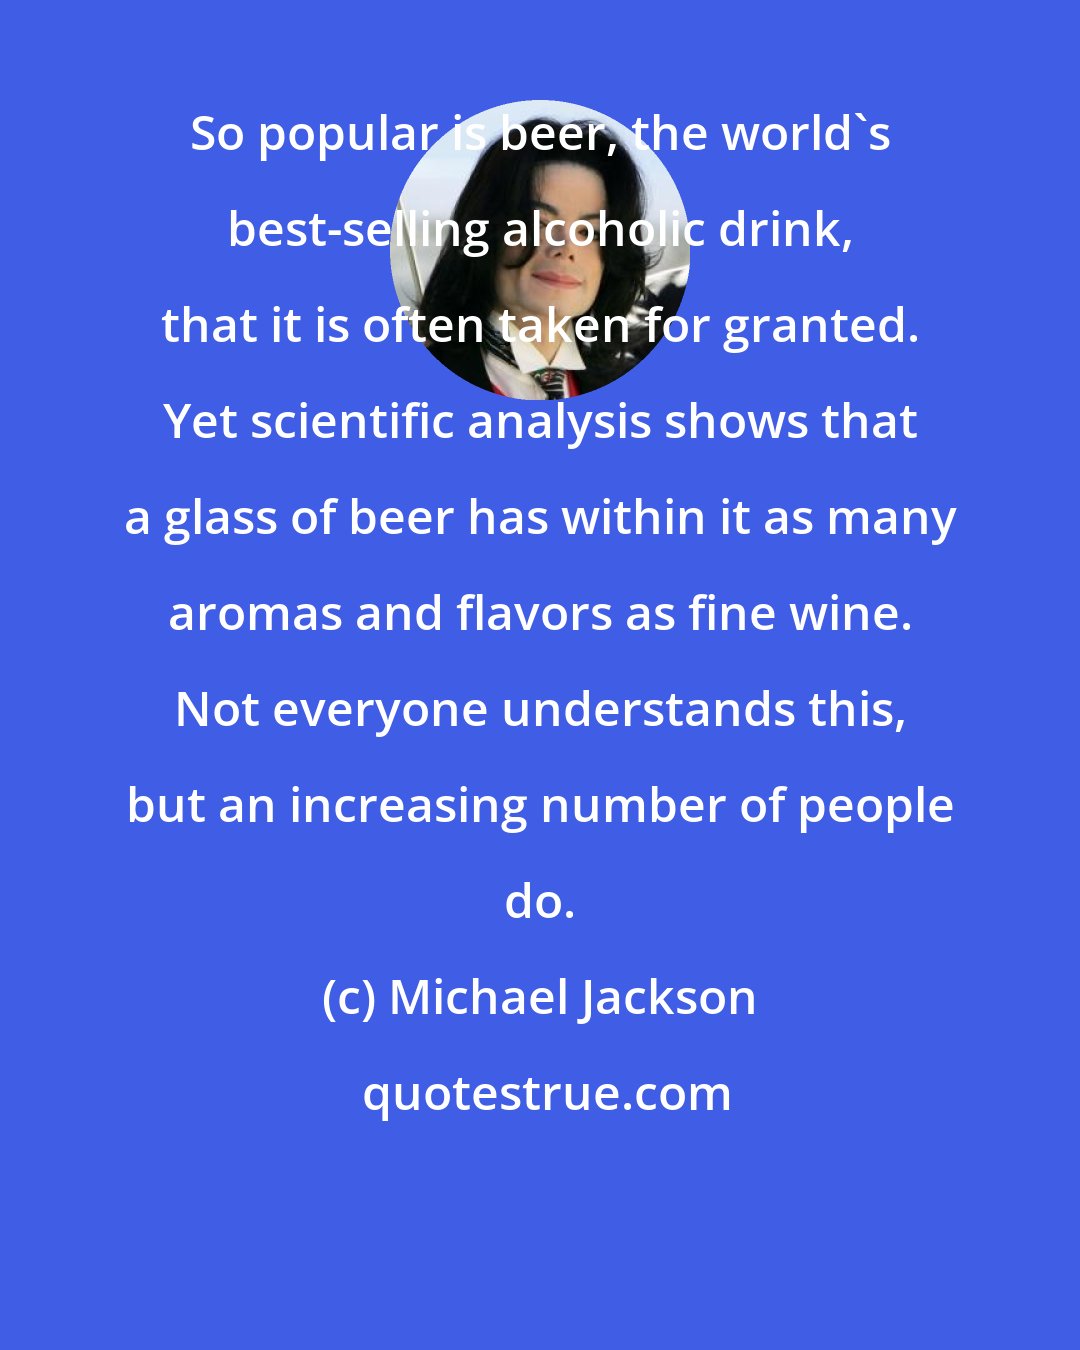 Michael Jackson: So popular is beer, the world's best-selling alcoholic drink, that it is often taken for granted. Yet scientific analysis shows that a glass of beer has within it as many aromas and flavors as fine wine. Not everyone understands this, but an increasing number of people do.